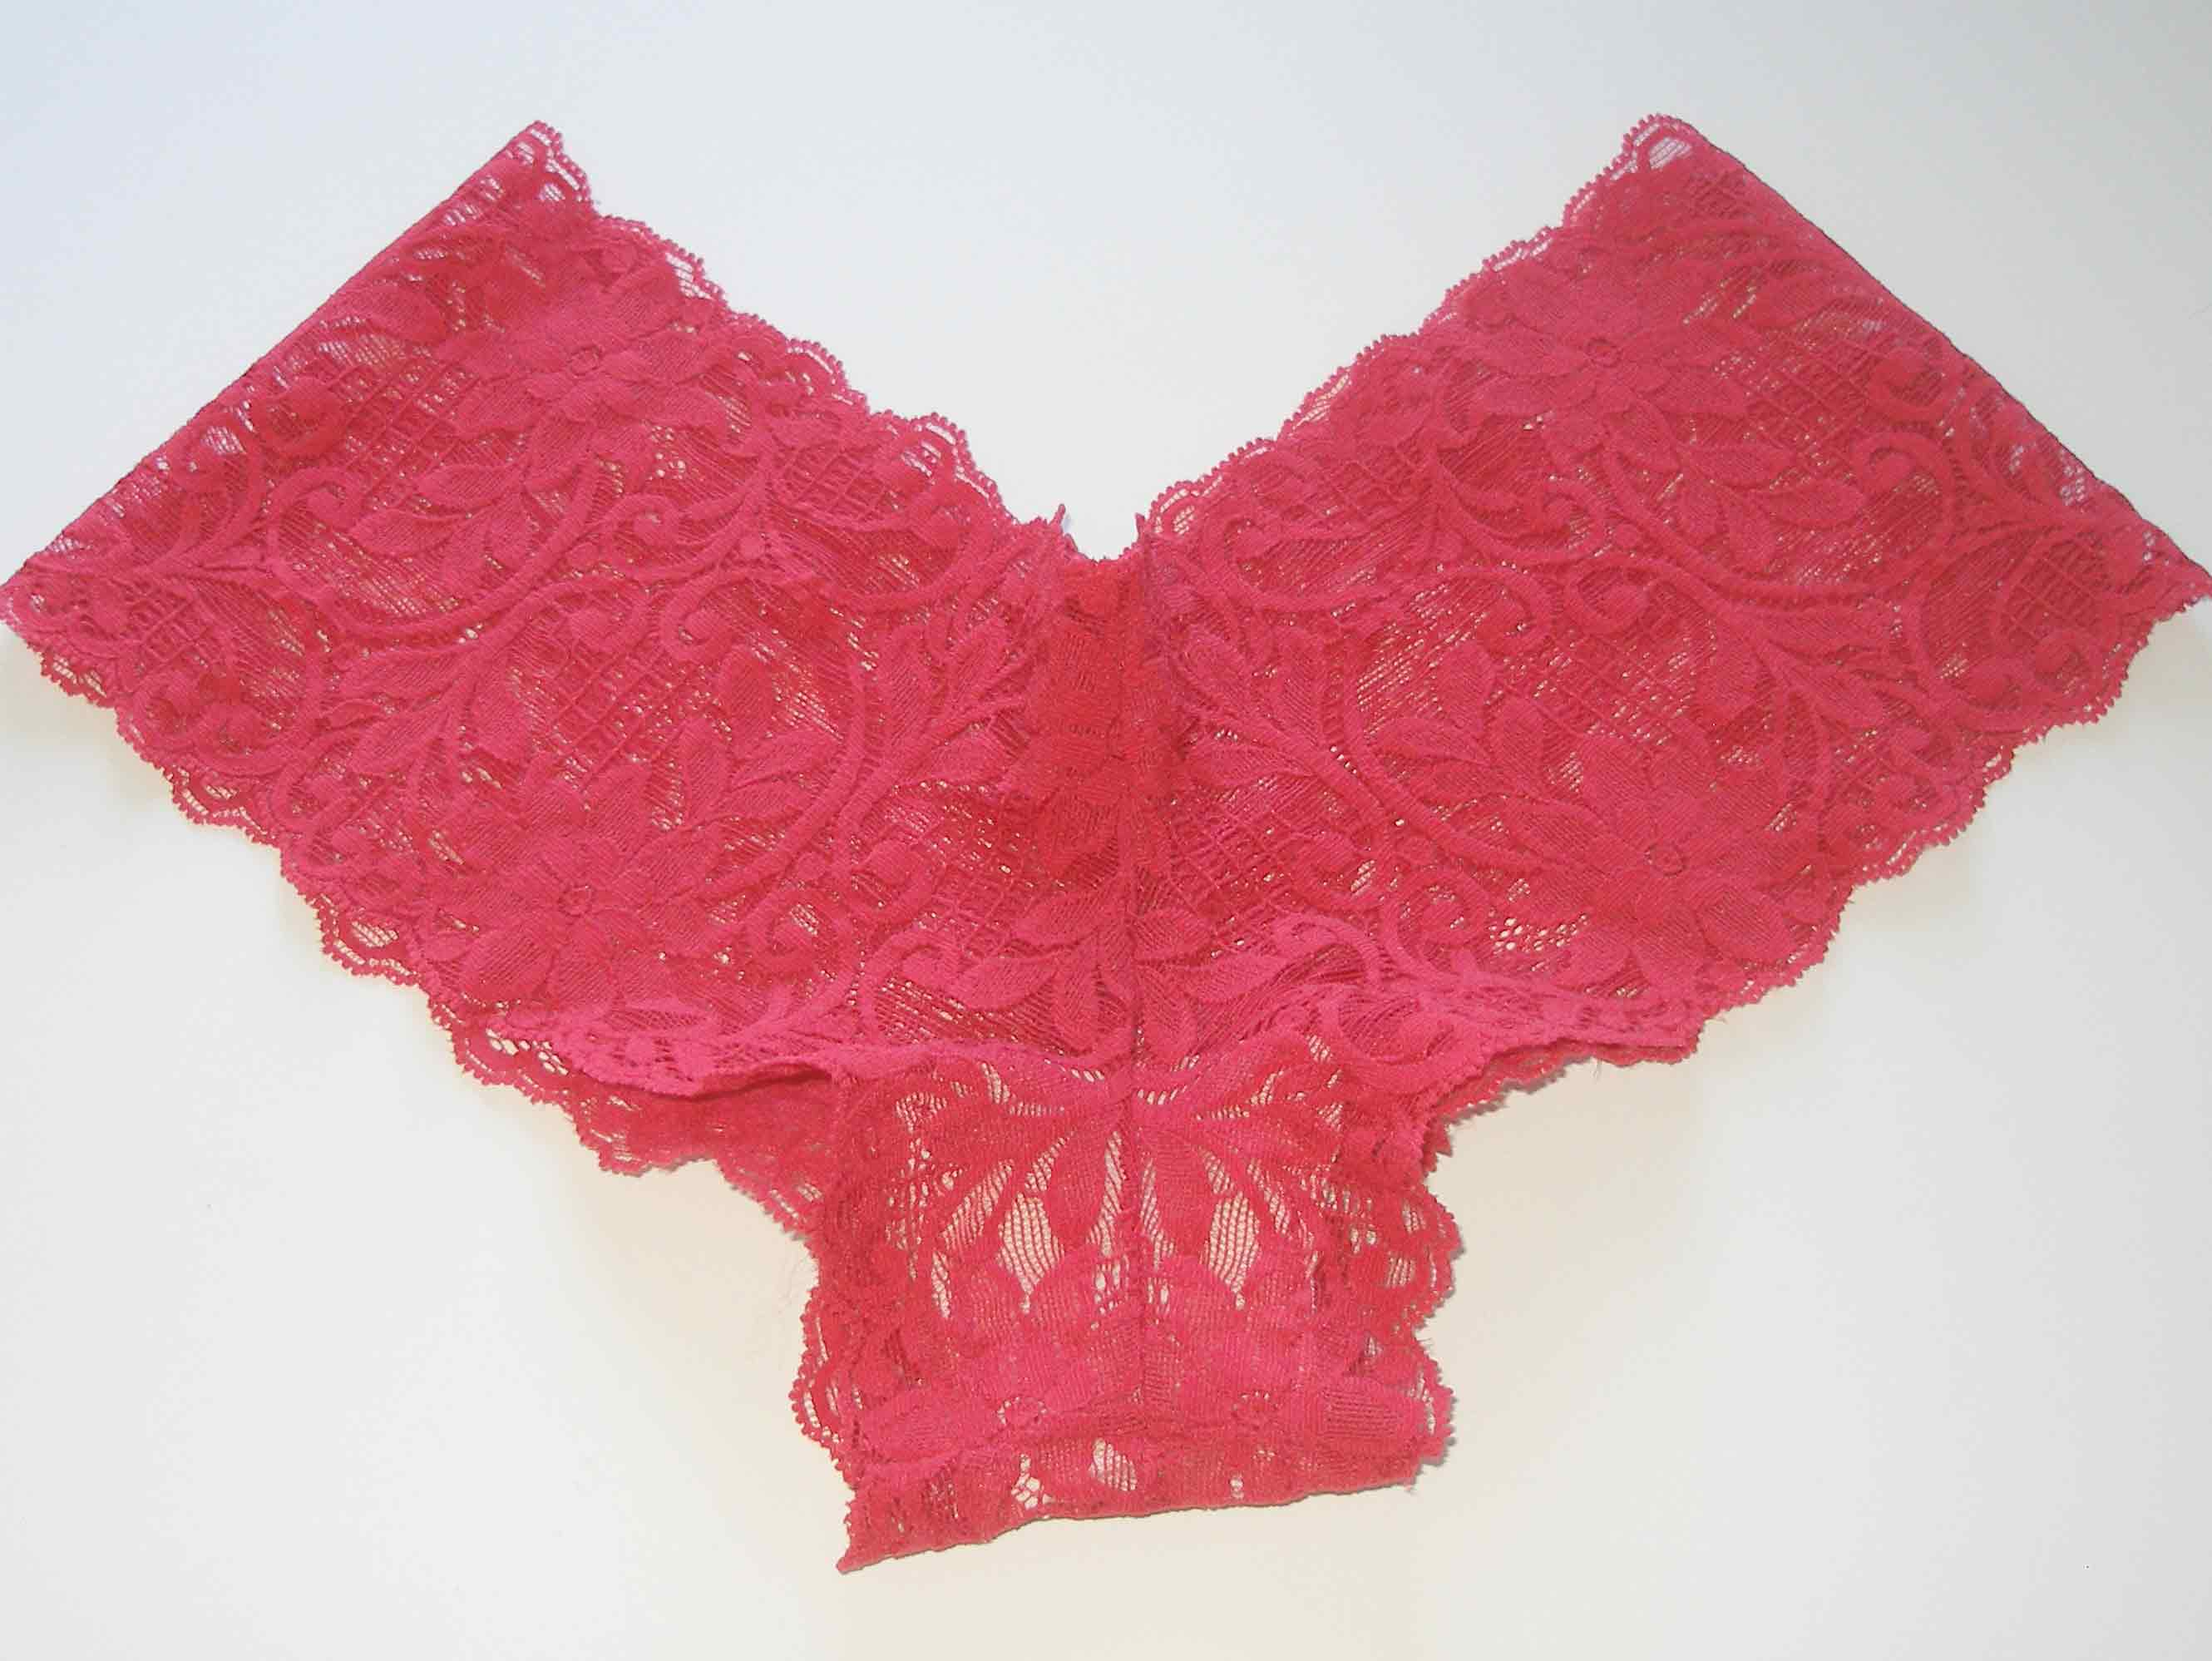 Crochet Lingerie Patterns Sew Your Own Lace Underwear Tutorial And Free Pattern So Sew Easy